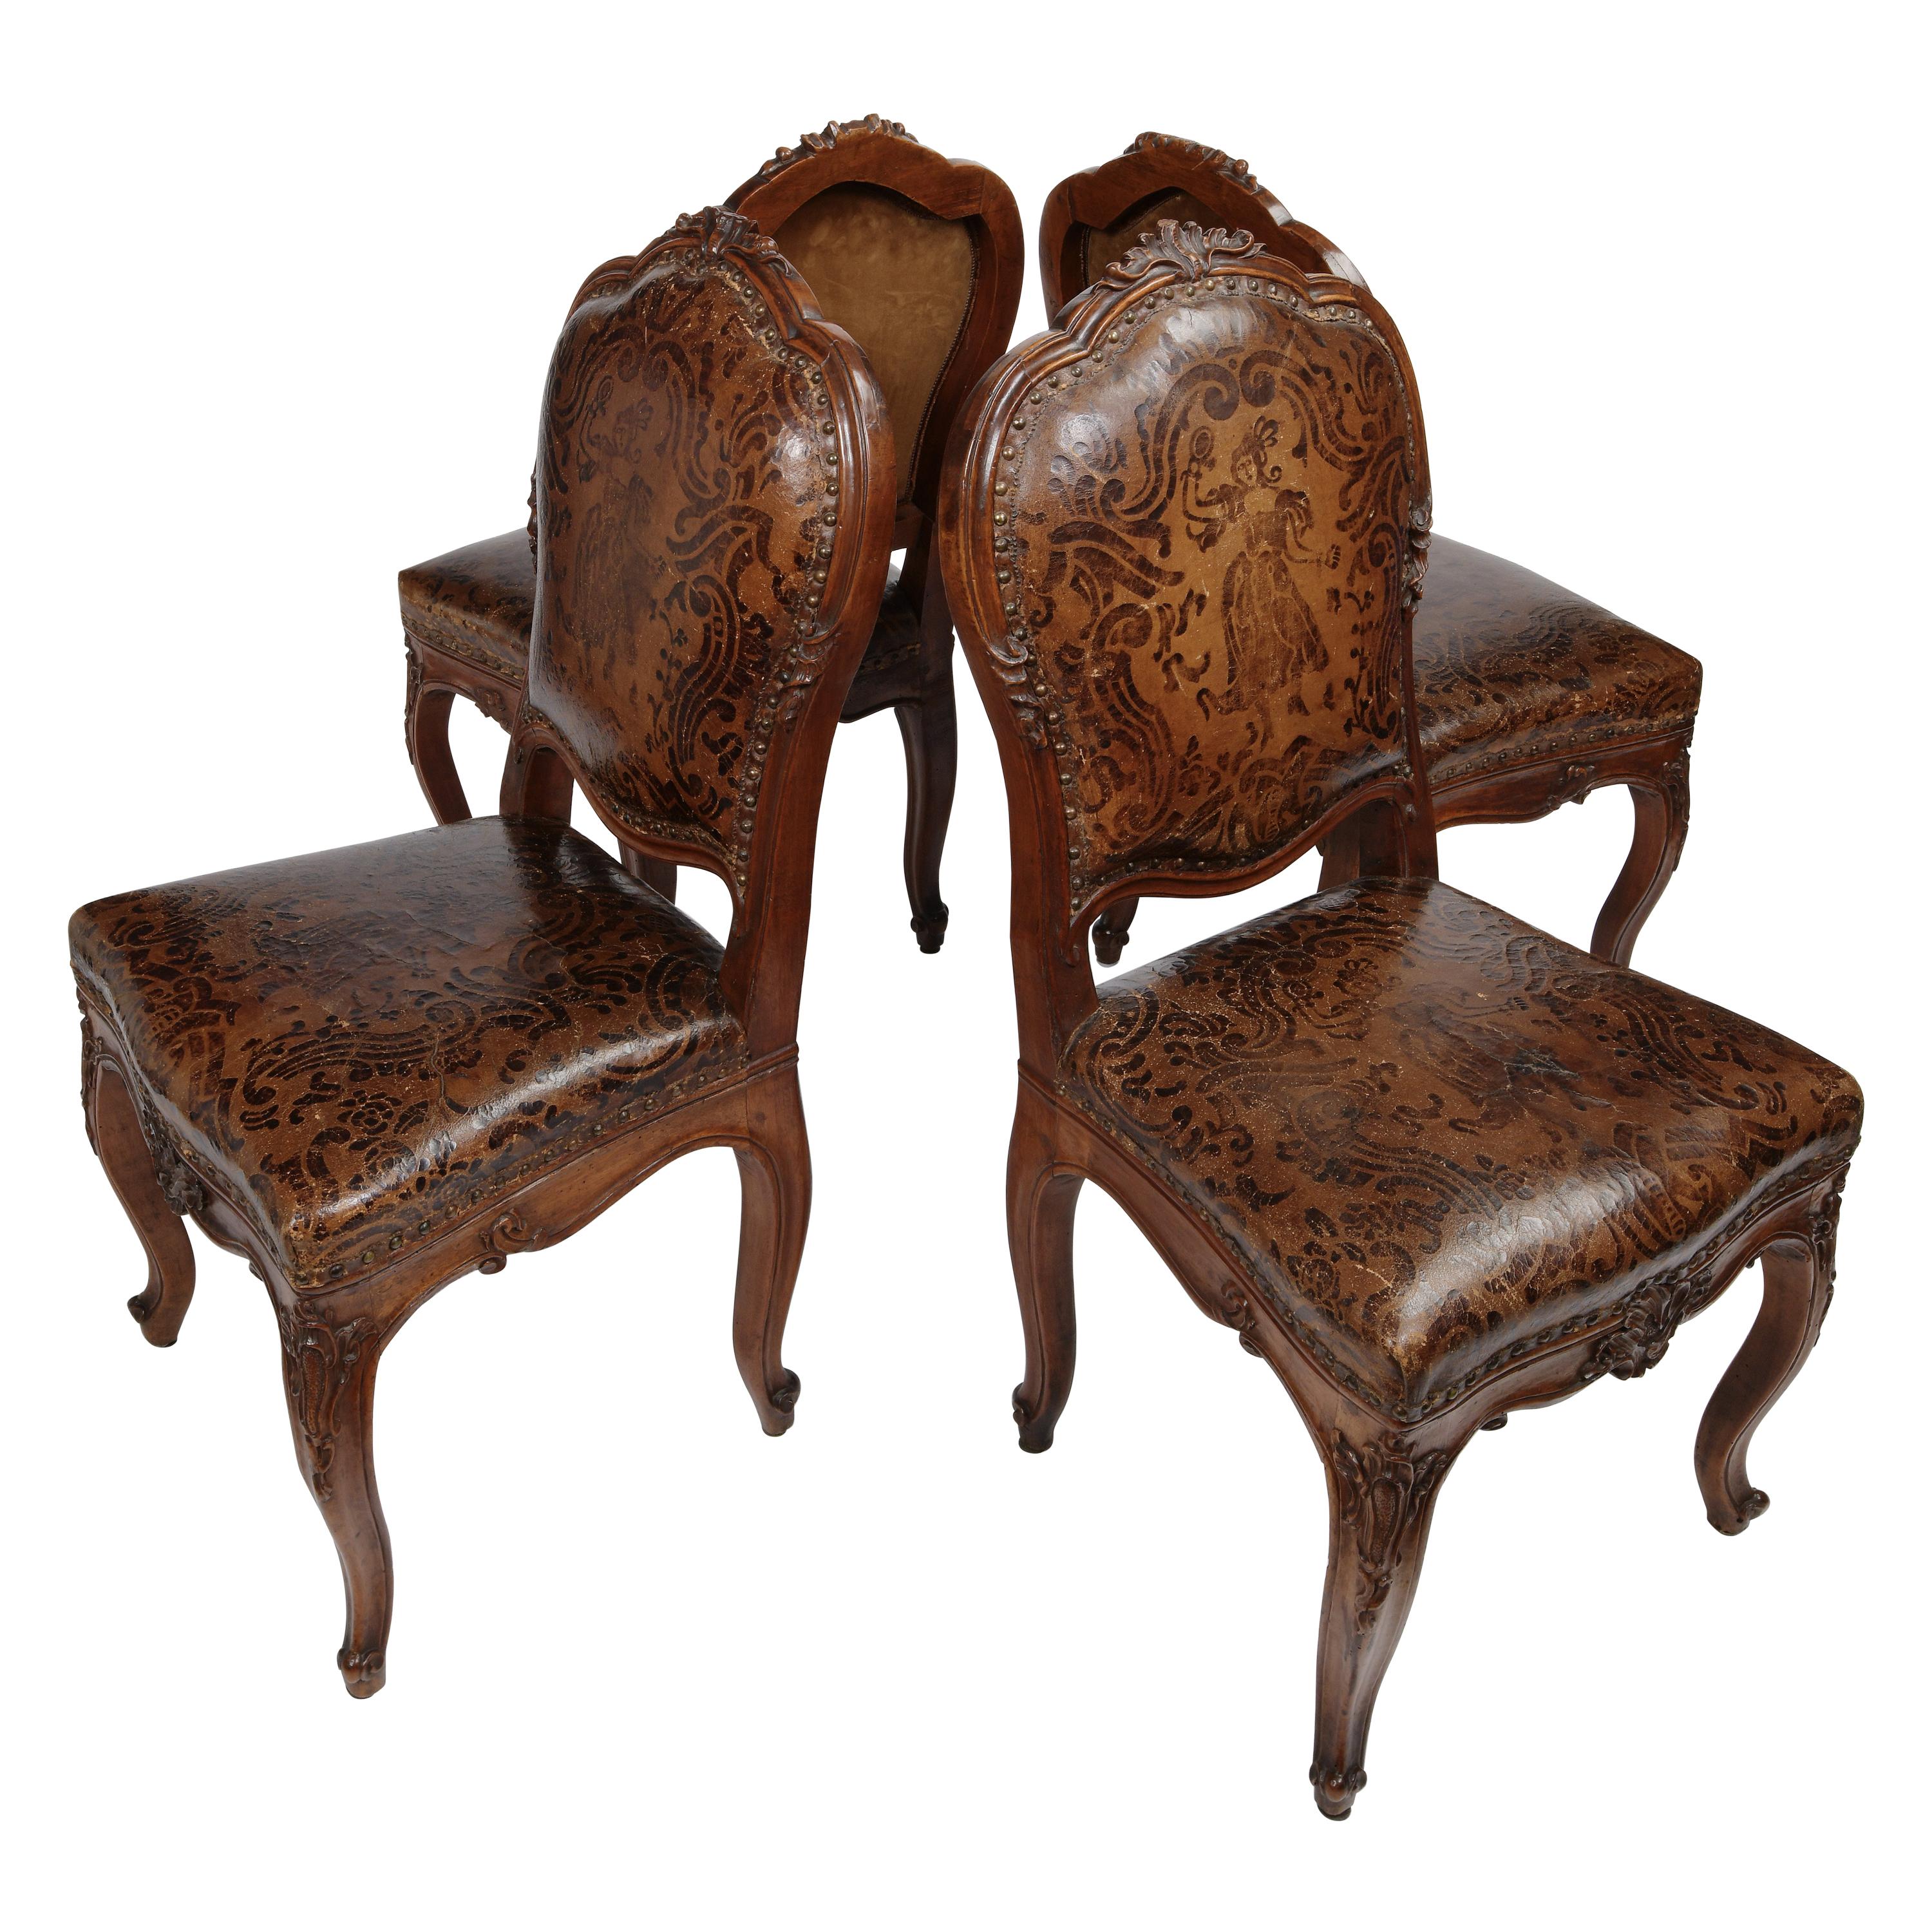 Italian Carved Walnut Chairs with Leather Covers, Milan, circa 1750 For Sale